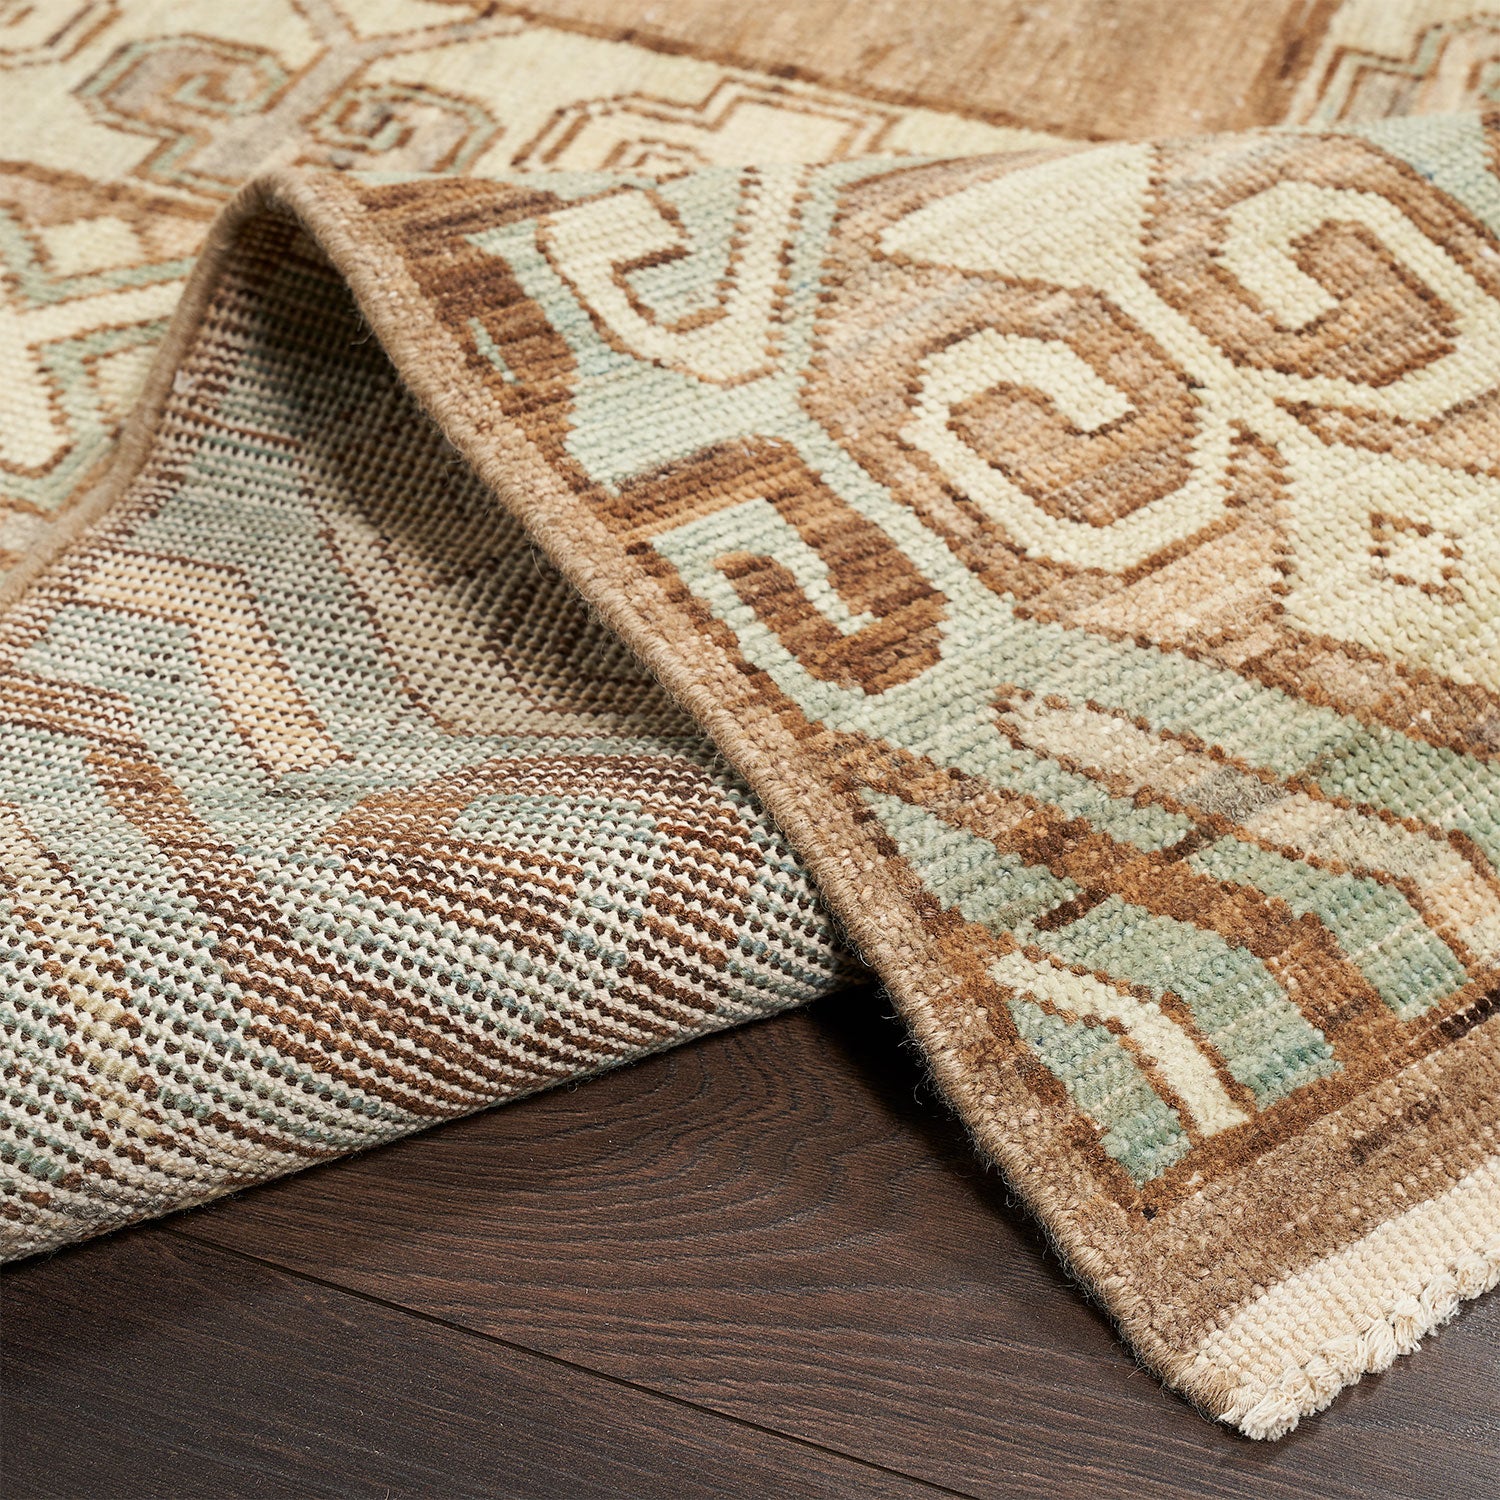 Intricate patterned rug with folded corner showcases traditional ethnic motif.